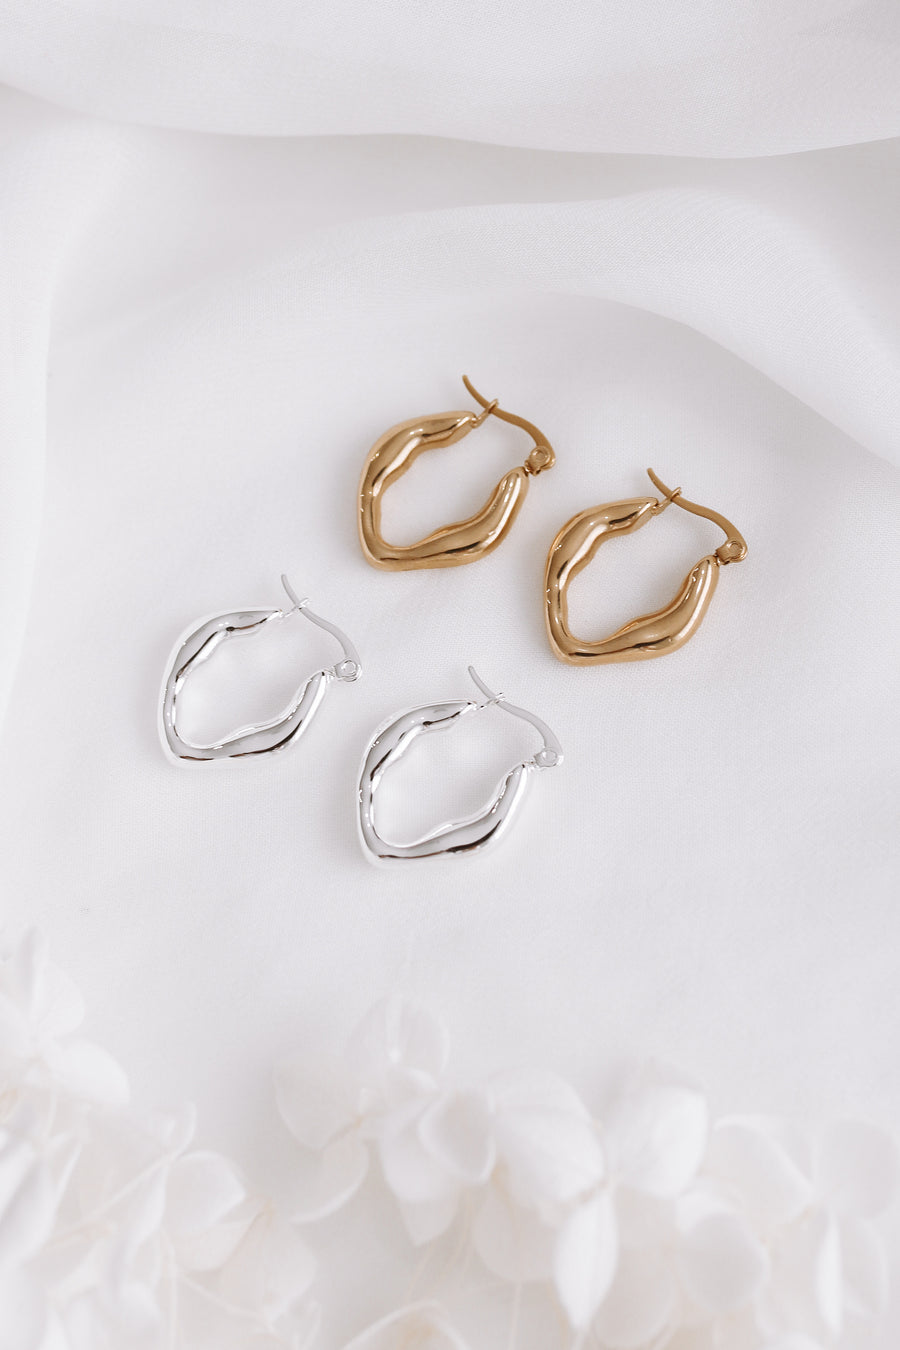 Chelsea - Gold or Silver Stainless Steel Hoops